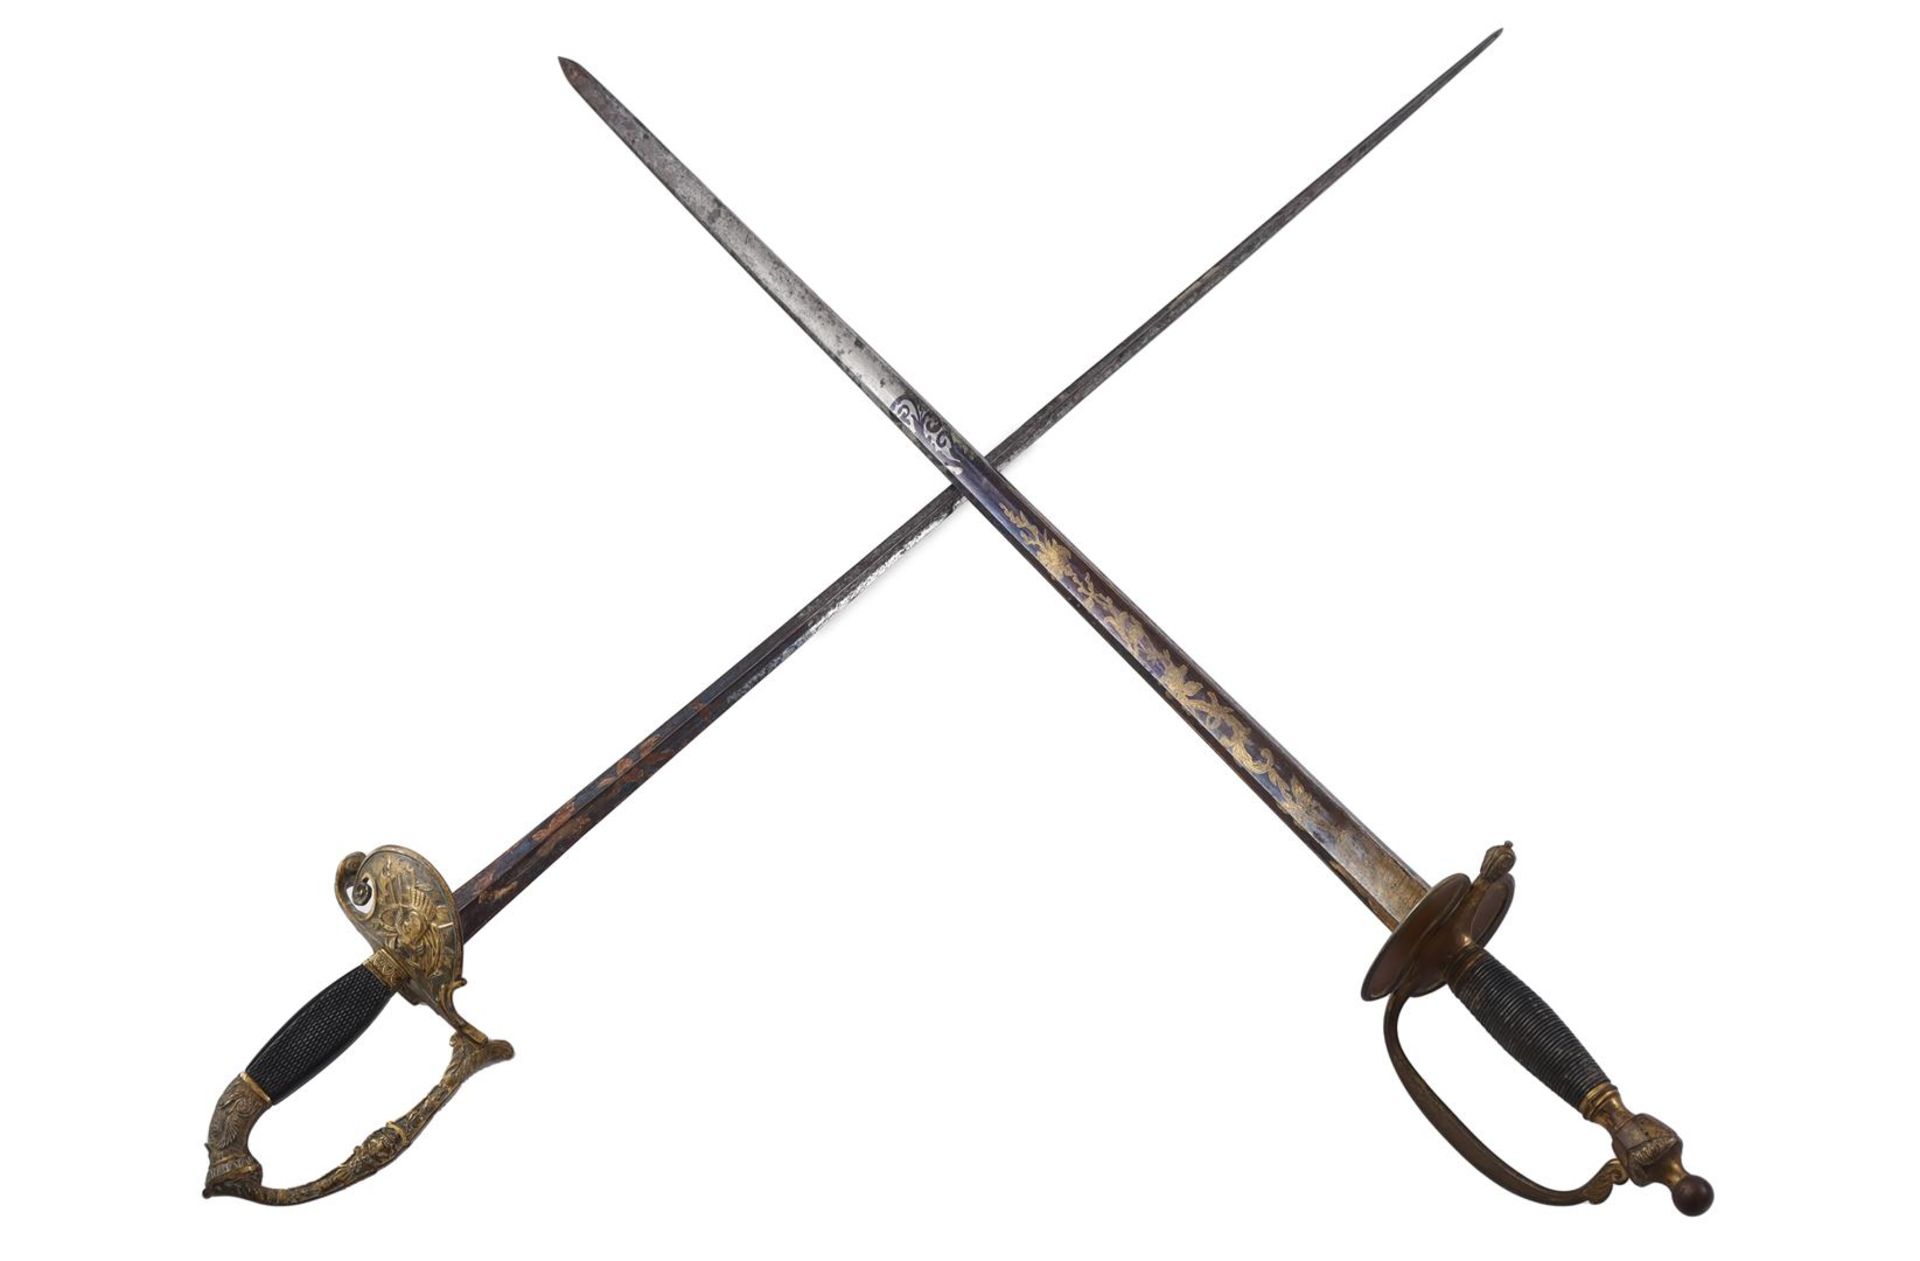 Epee and sabre